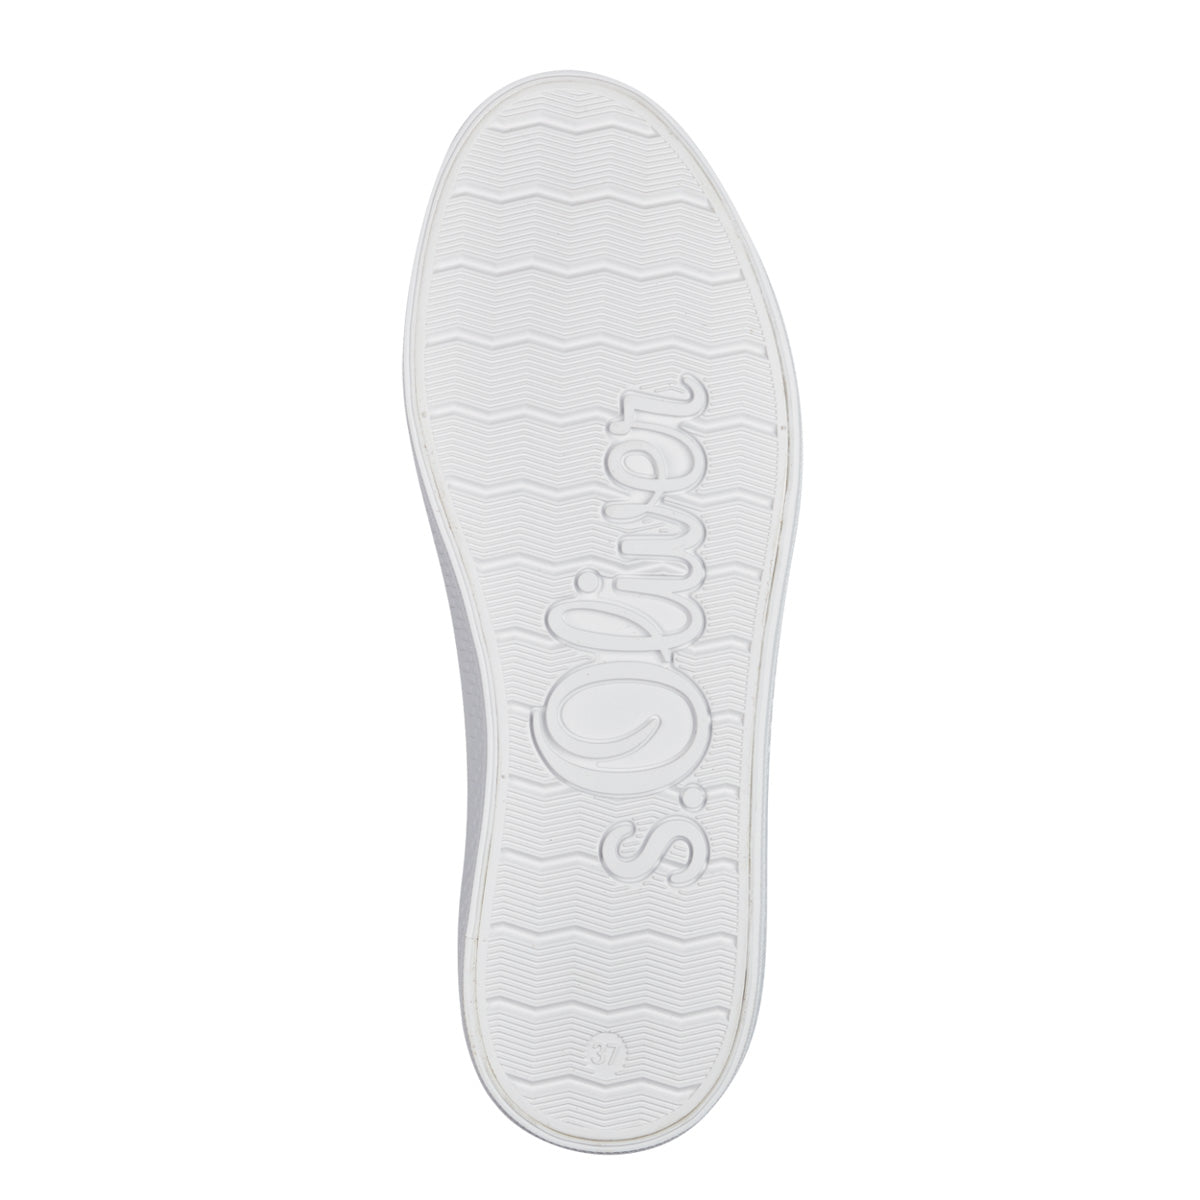 View of the sturdy sole, highlighting its practical design.